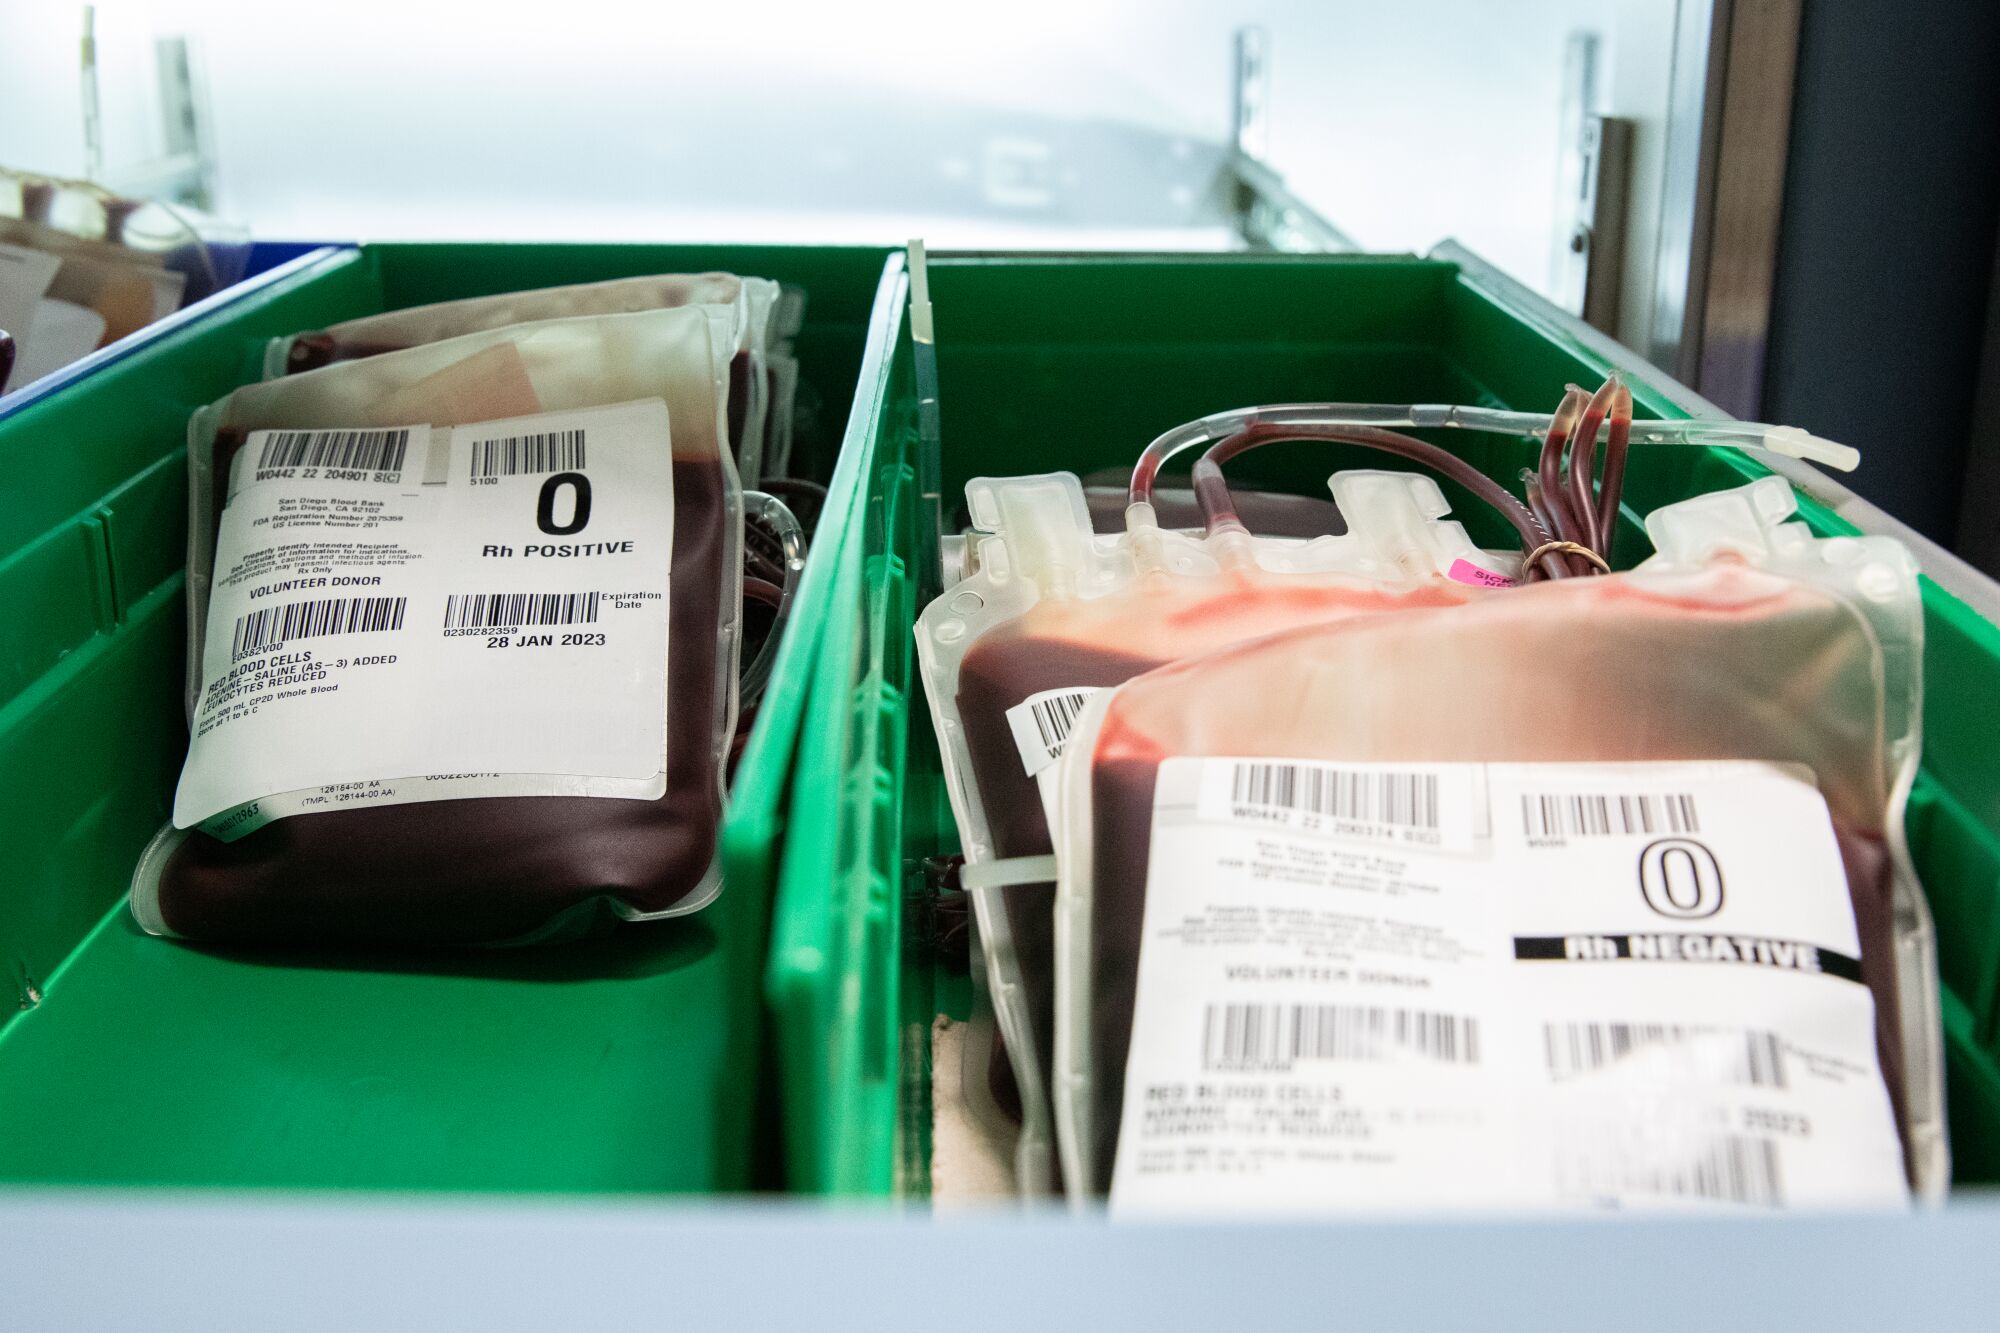 Bags of donated blood are stored in cooled refrigerators in the laboratory of Rady Children's Hospital in San Diego, CA .